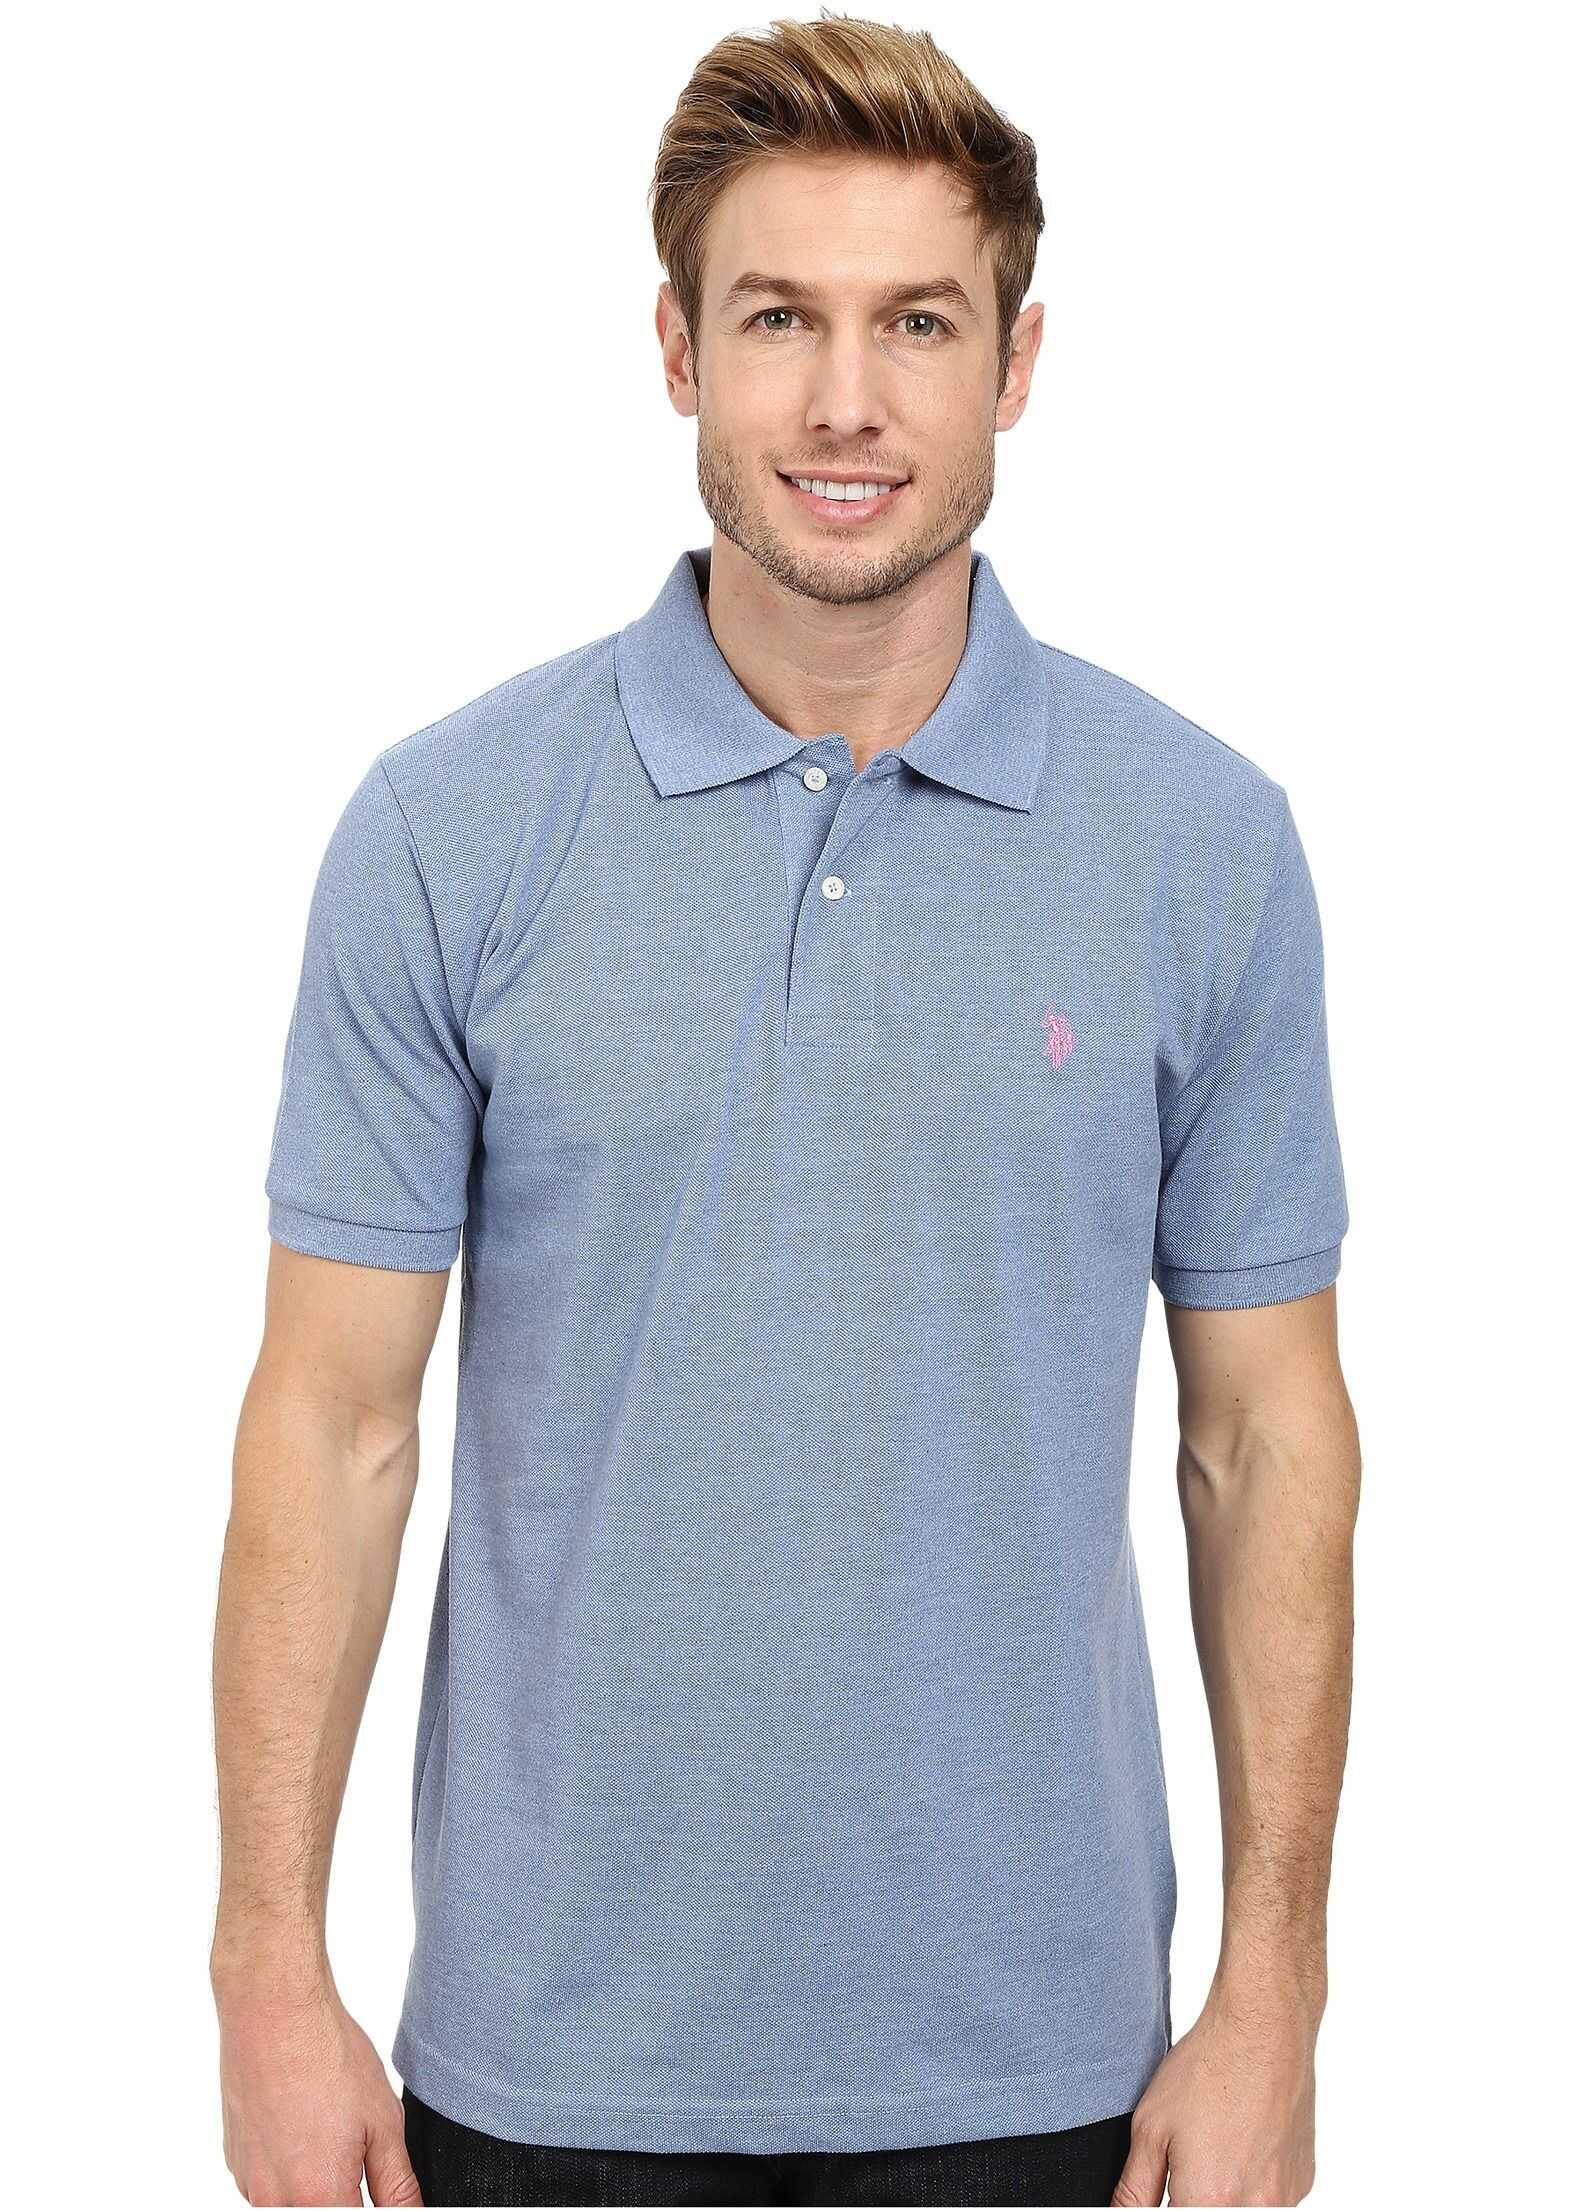 U.S. POLO ASSN. Solid Cotton Pique Polo with Small Pony Riviera Heather/Connecticut Pink